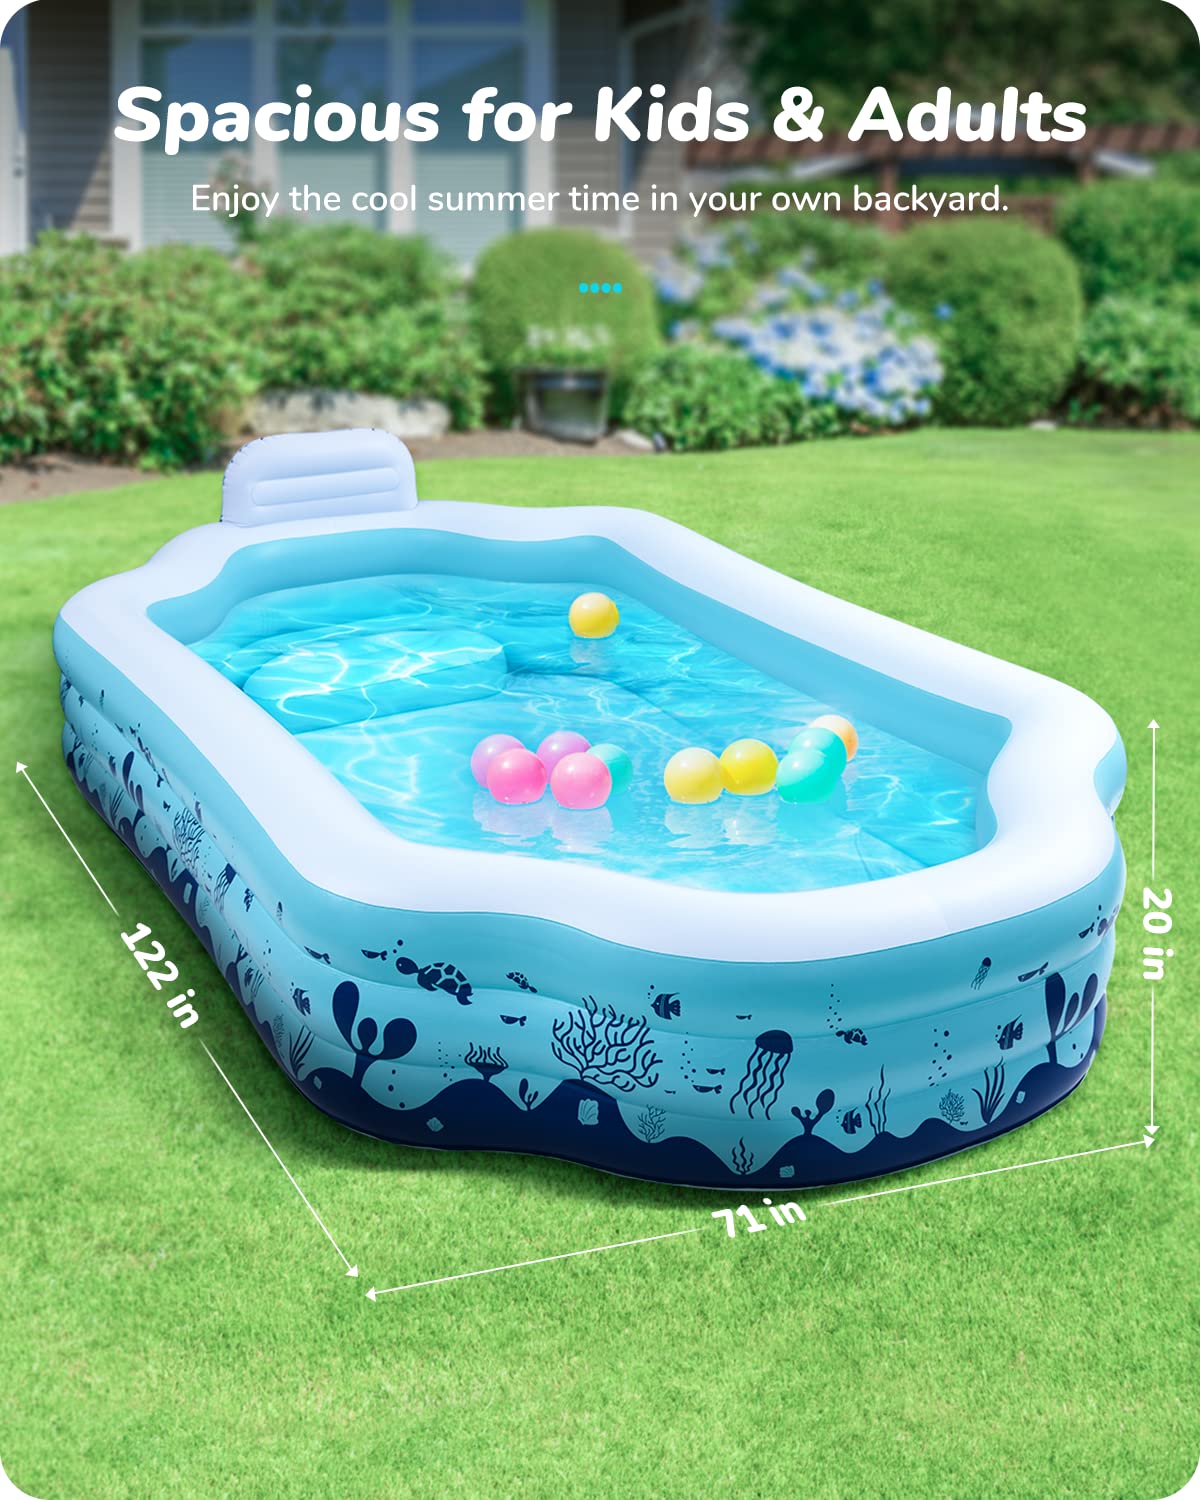 Valwix Inflatable Swimming Pool, Full-Sized Roma Shape, Ages 3+, Outdoor Garden Backyard Family Pool